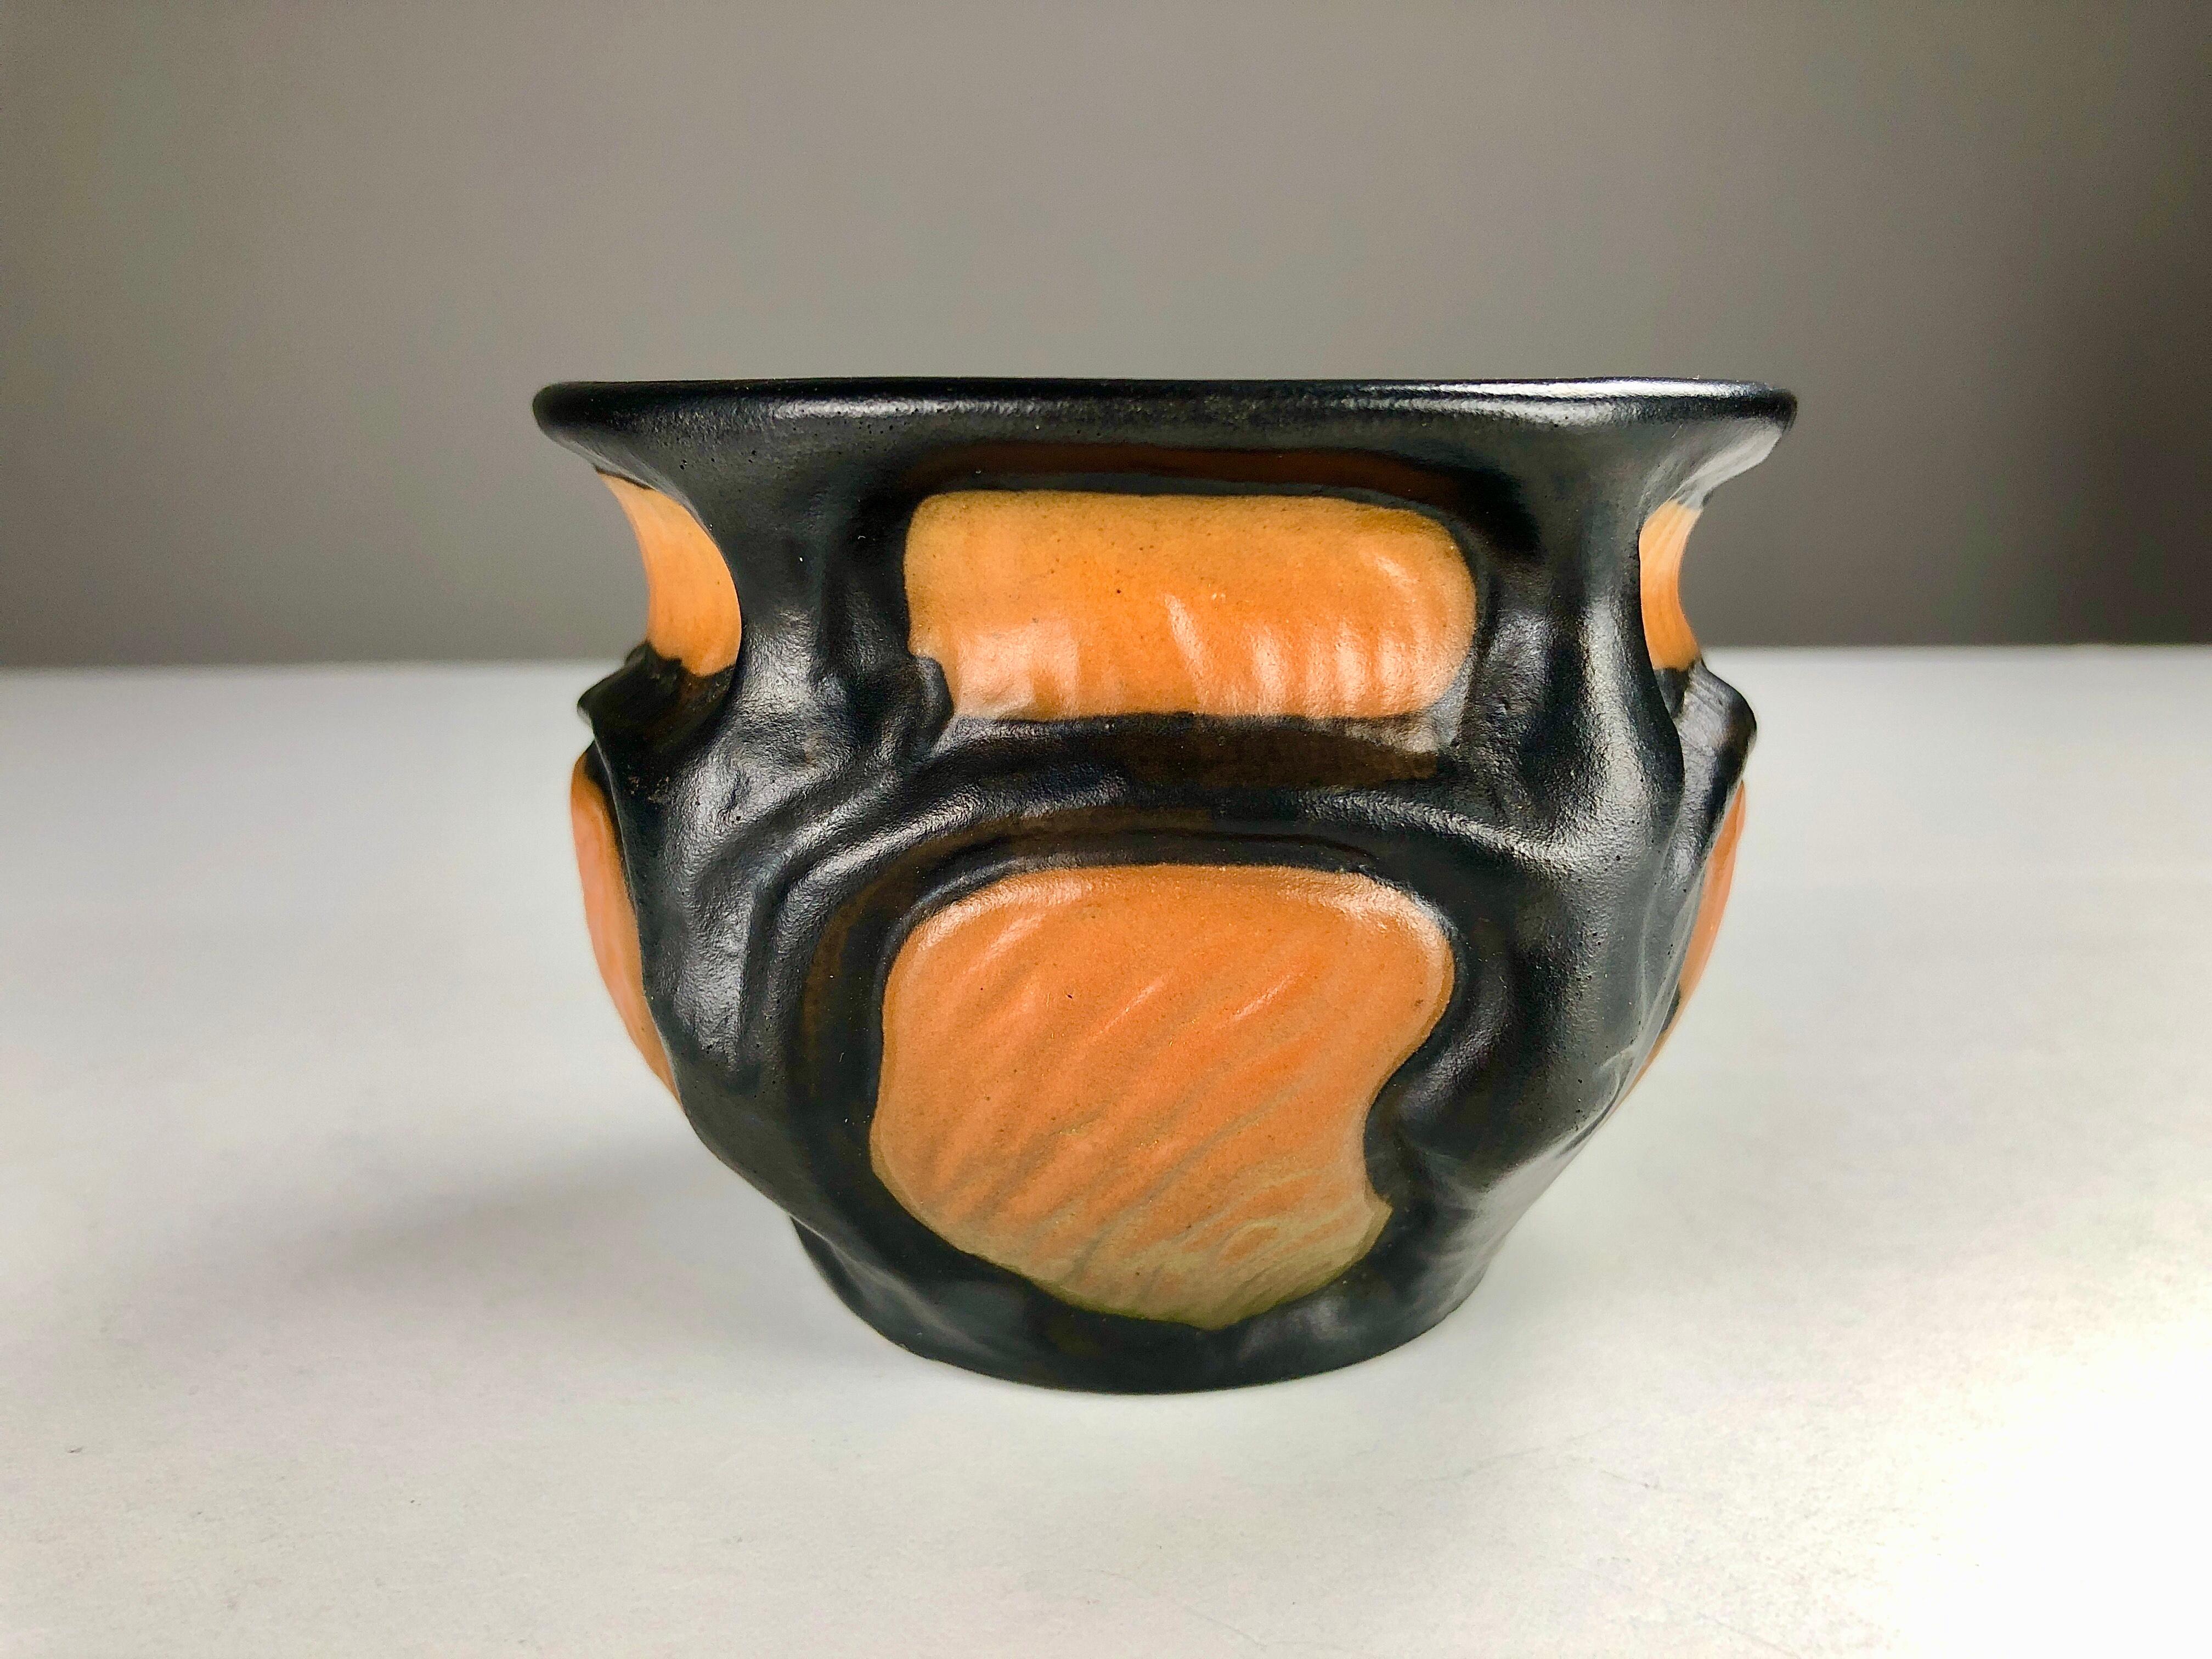 Hand-crafted small Danish Art Nouveau vase by Thorvald Bindesboell for P. Ipsens Enke designed in 1905

The vase is in good vintage condition.

Ipsens Enke (1843 - 1955) was a very succesfull company that especially during the first part of the